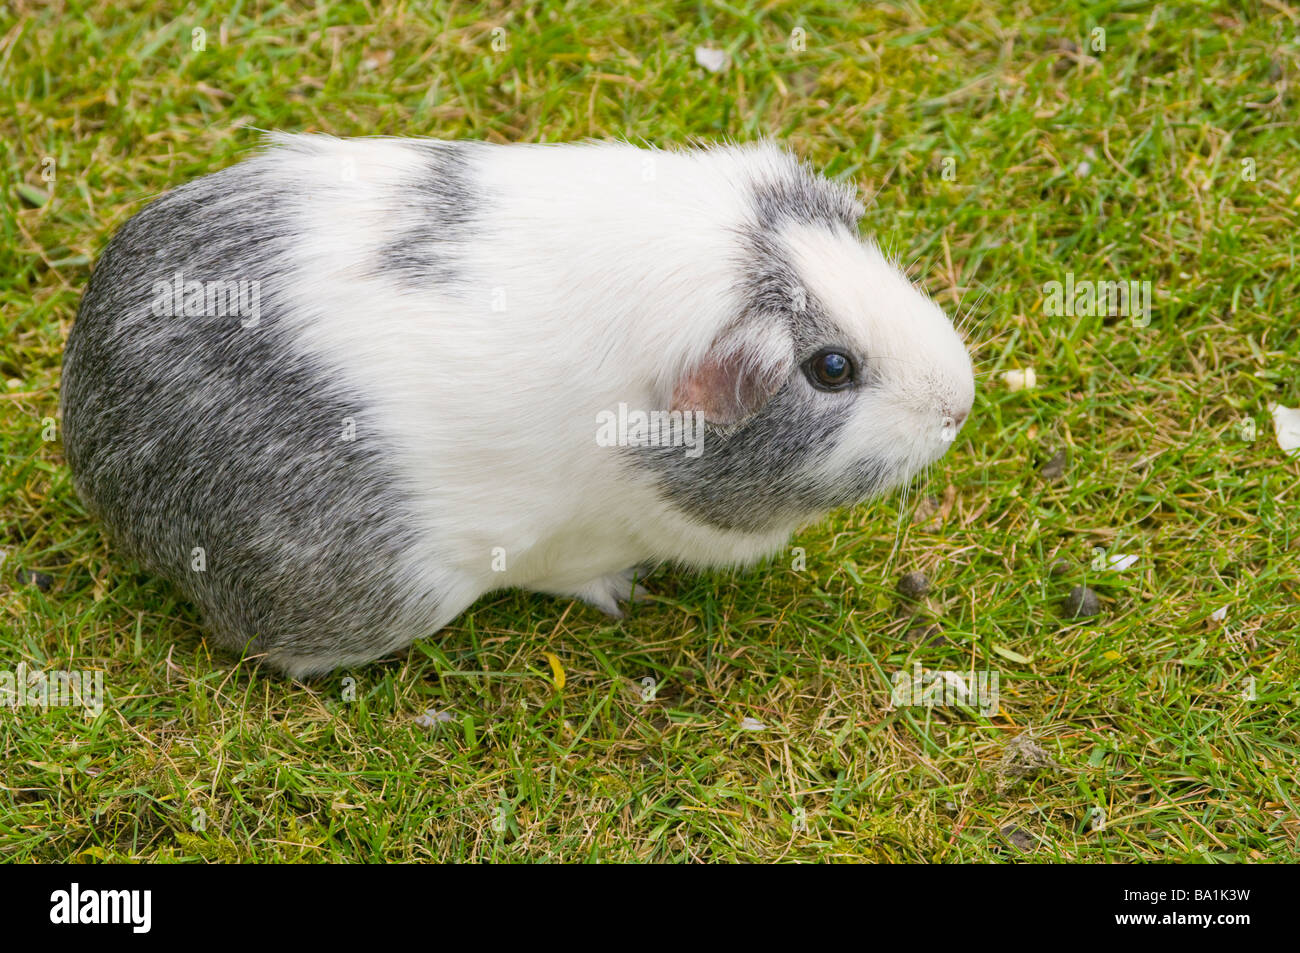 Black and White Guinea Pig Cavia porcellus household pet pets pigs Stock Photo